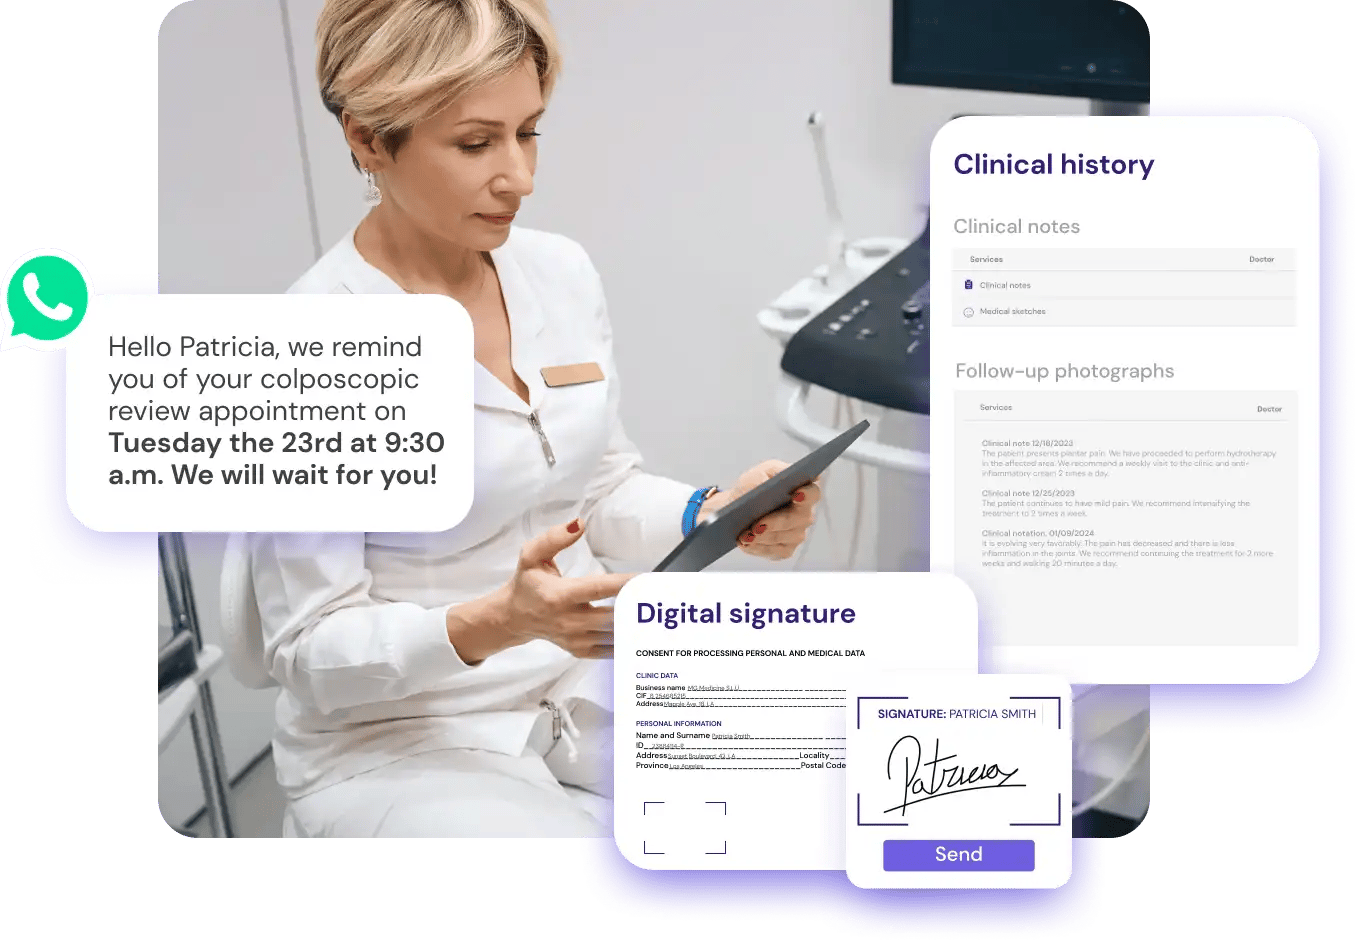 flowww is a software for gynecological clinics